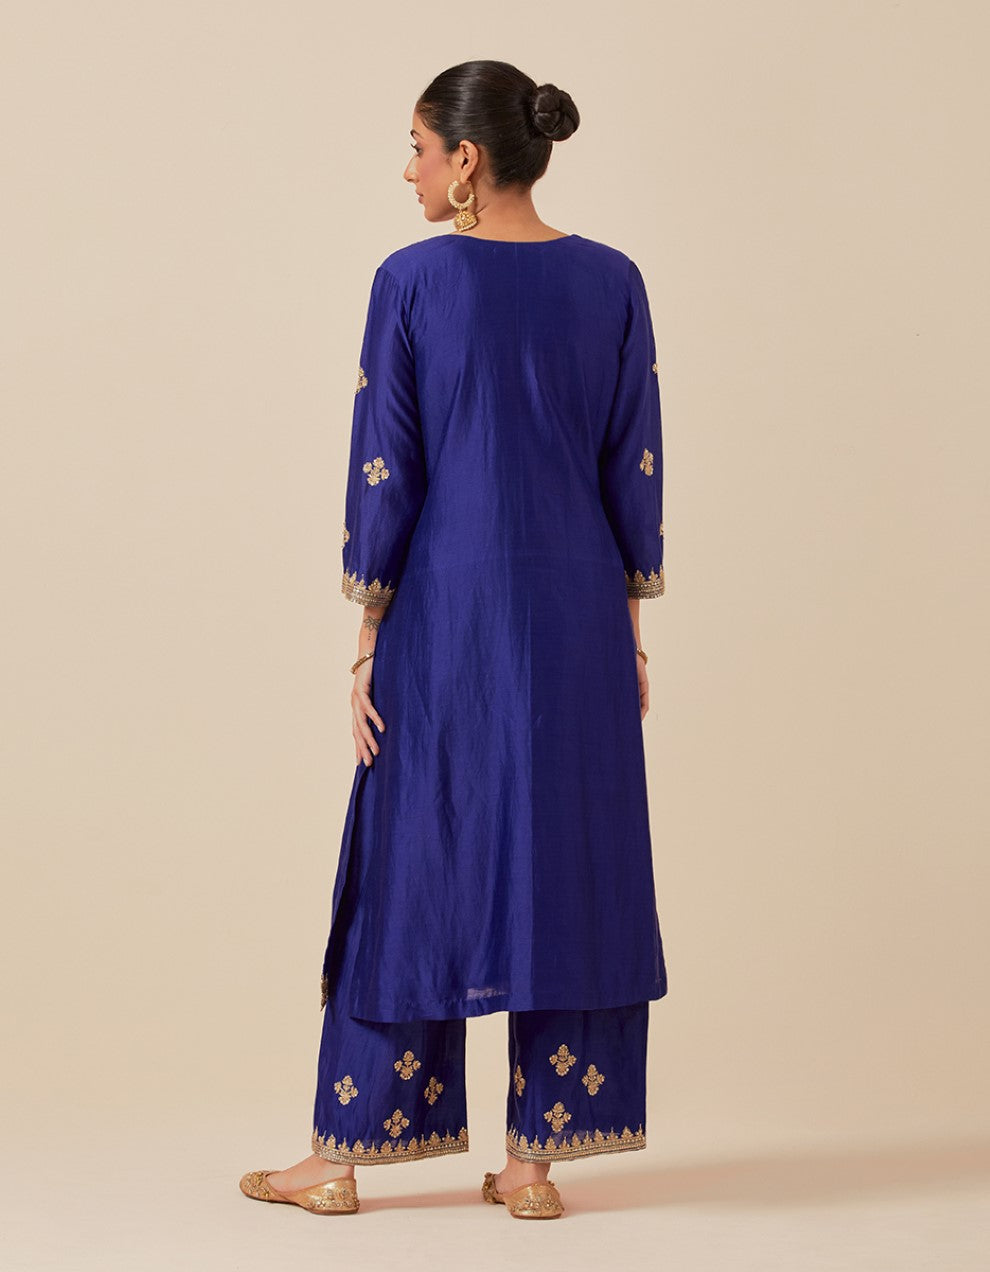 Blue hand embroidered kurta with pants and dupatta